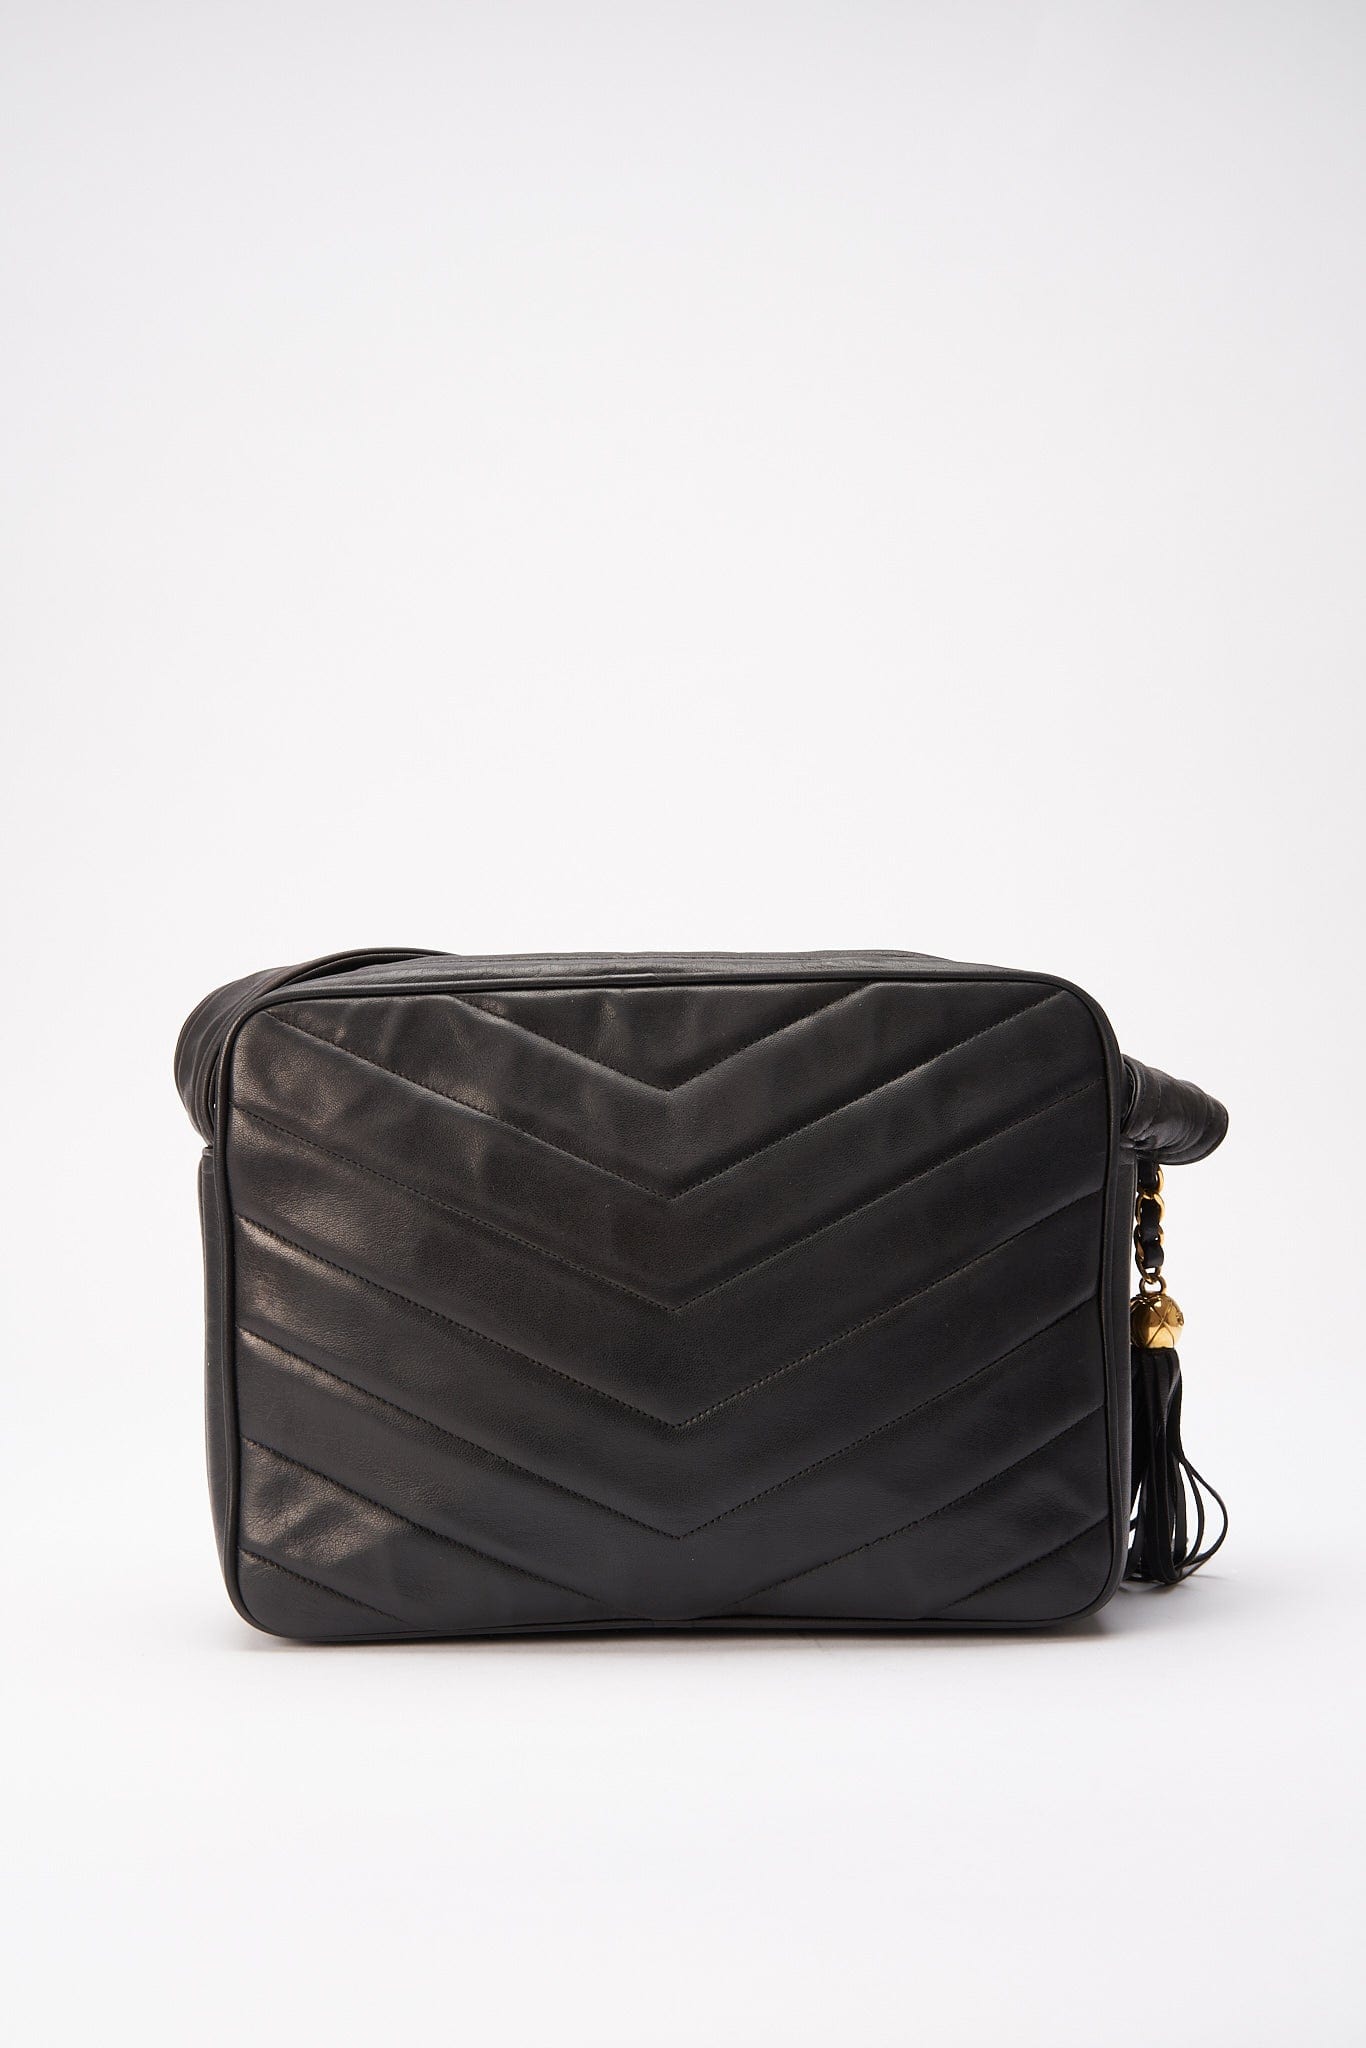 Chanel Quilted Chevron All Black Camera Crossbody Bag